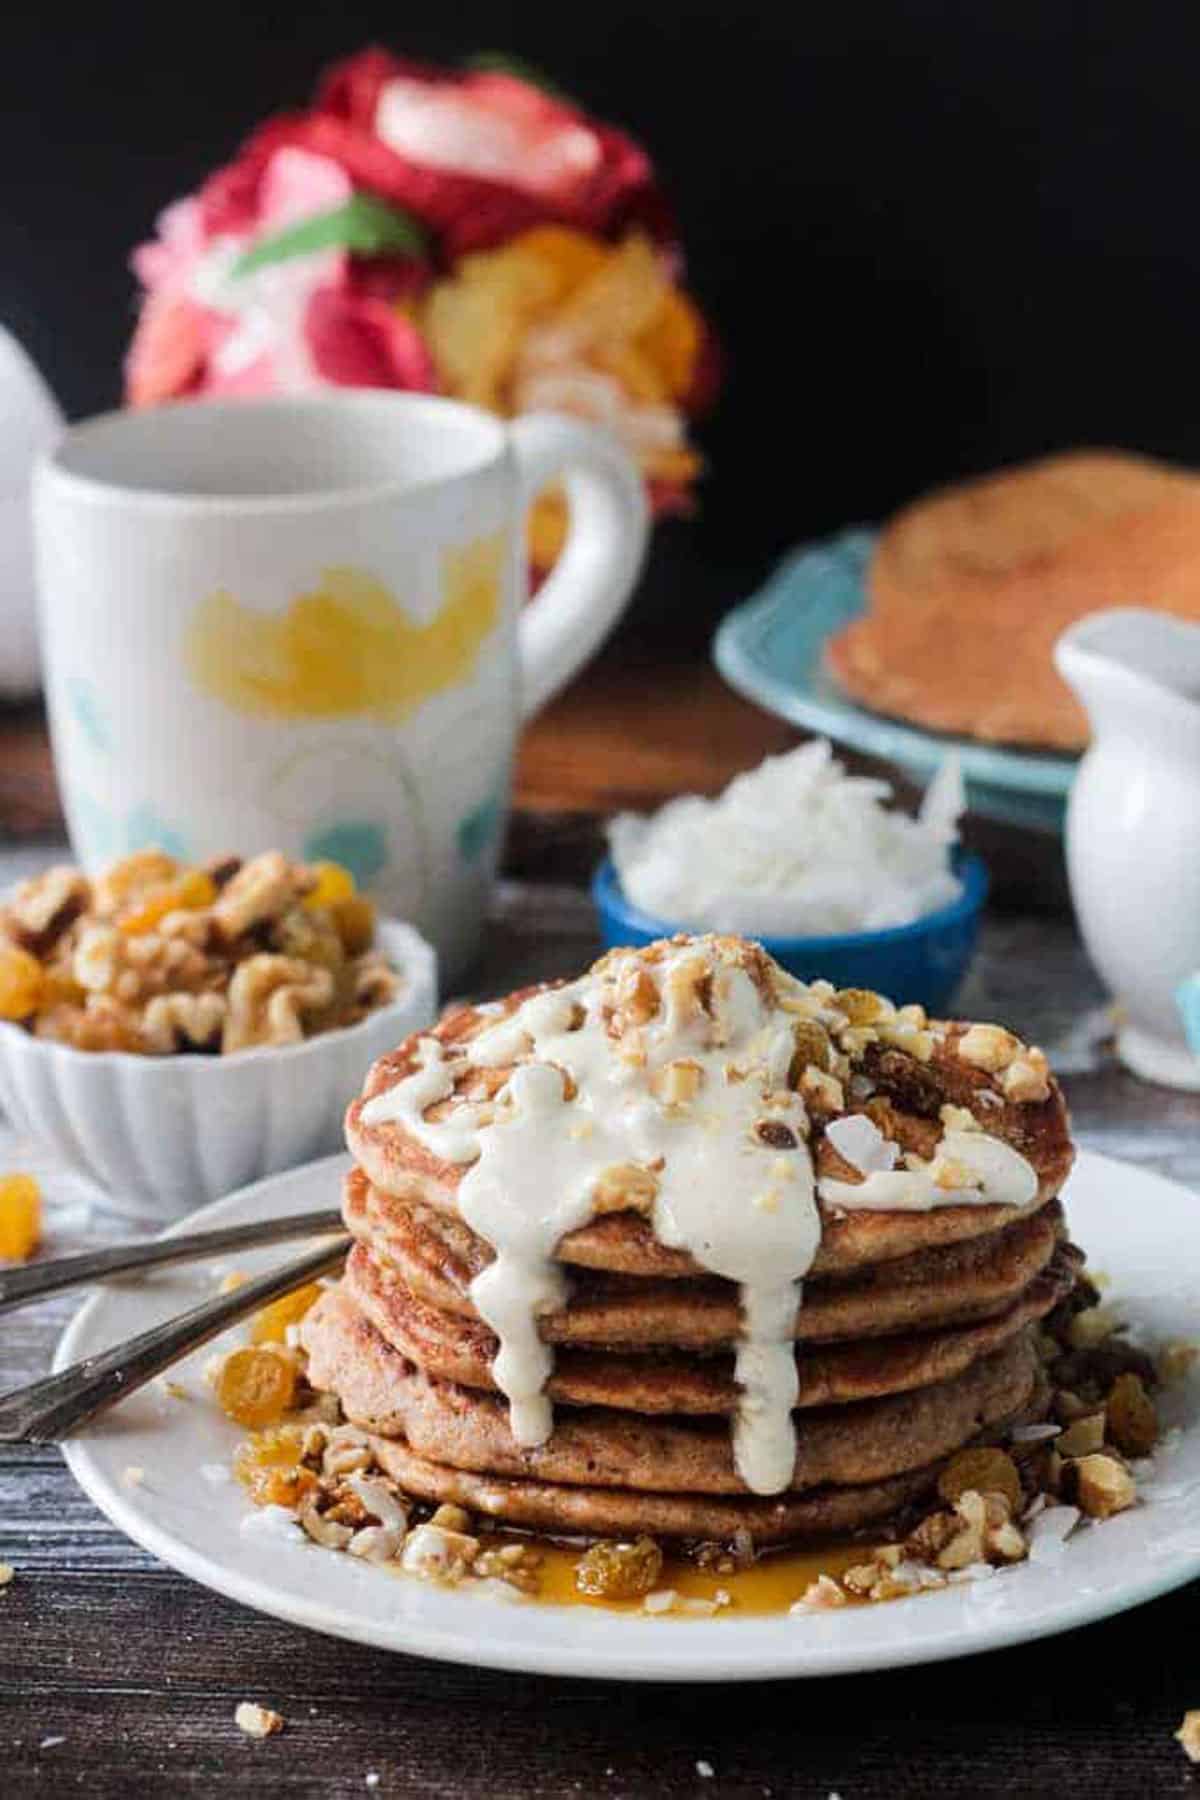 Chopped walnuts on top of white icing that is dripping down the side of a pancake stack.